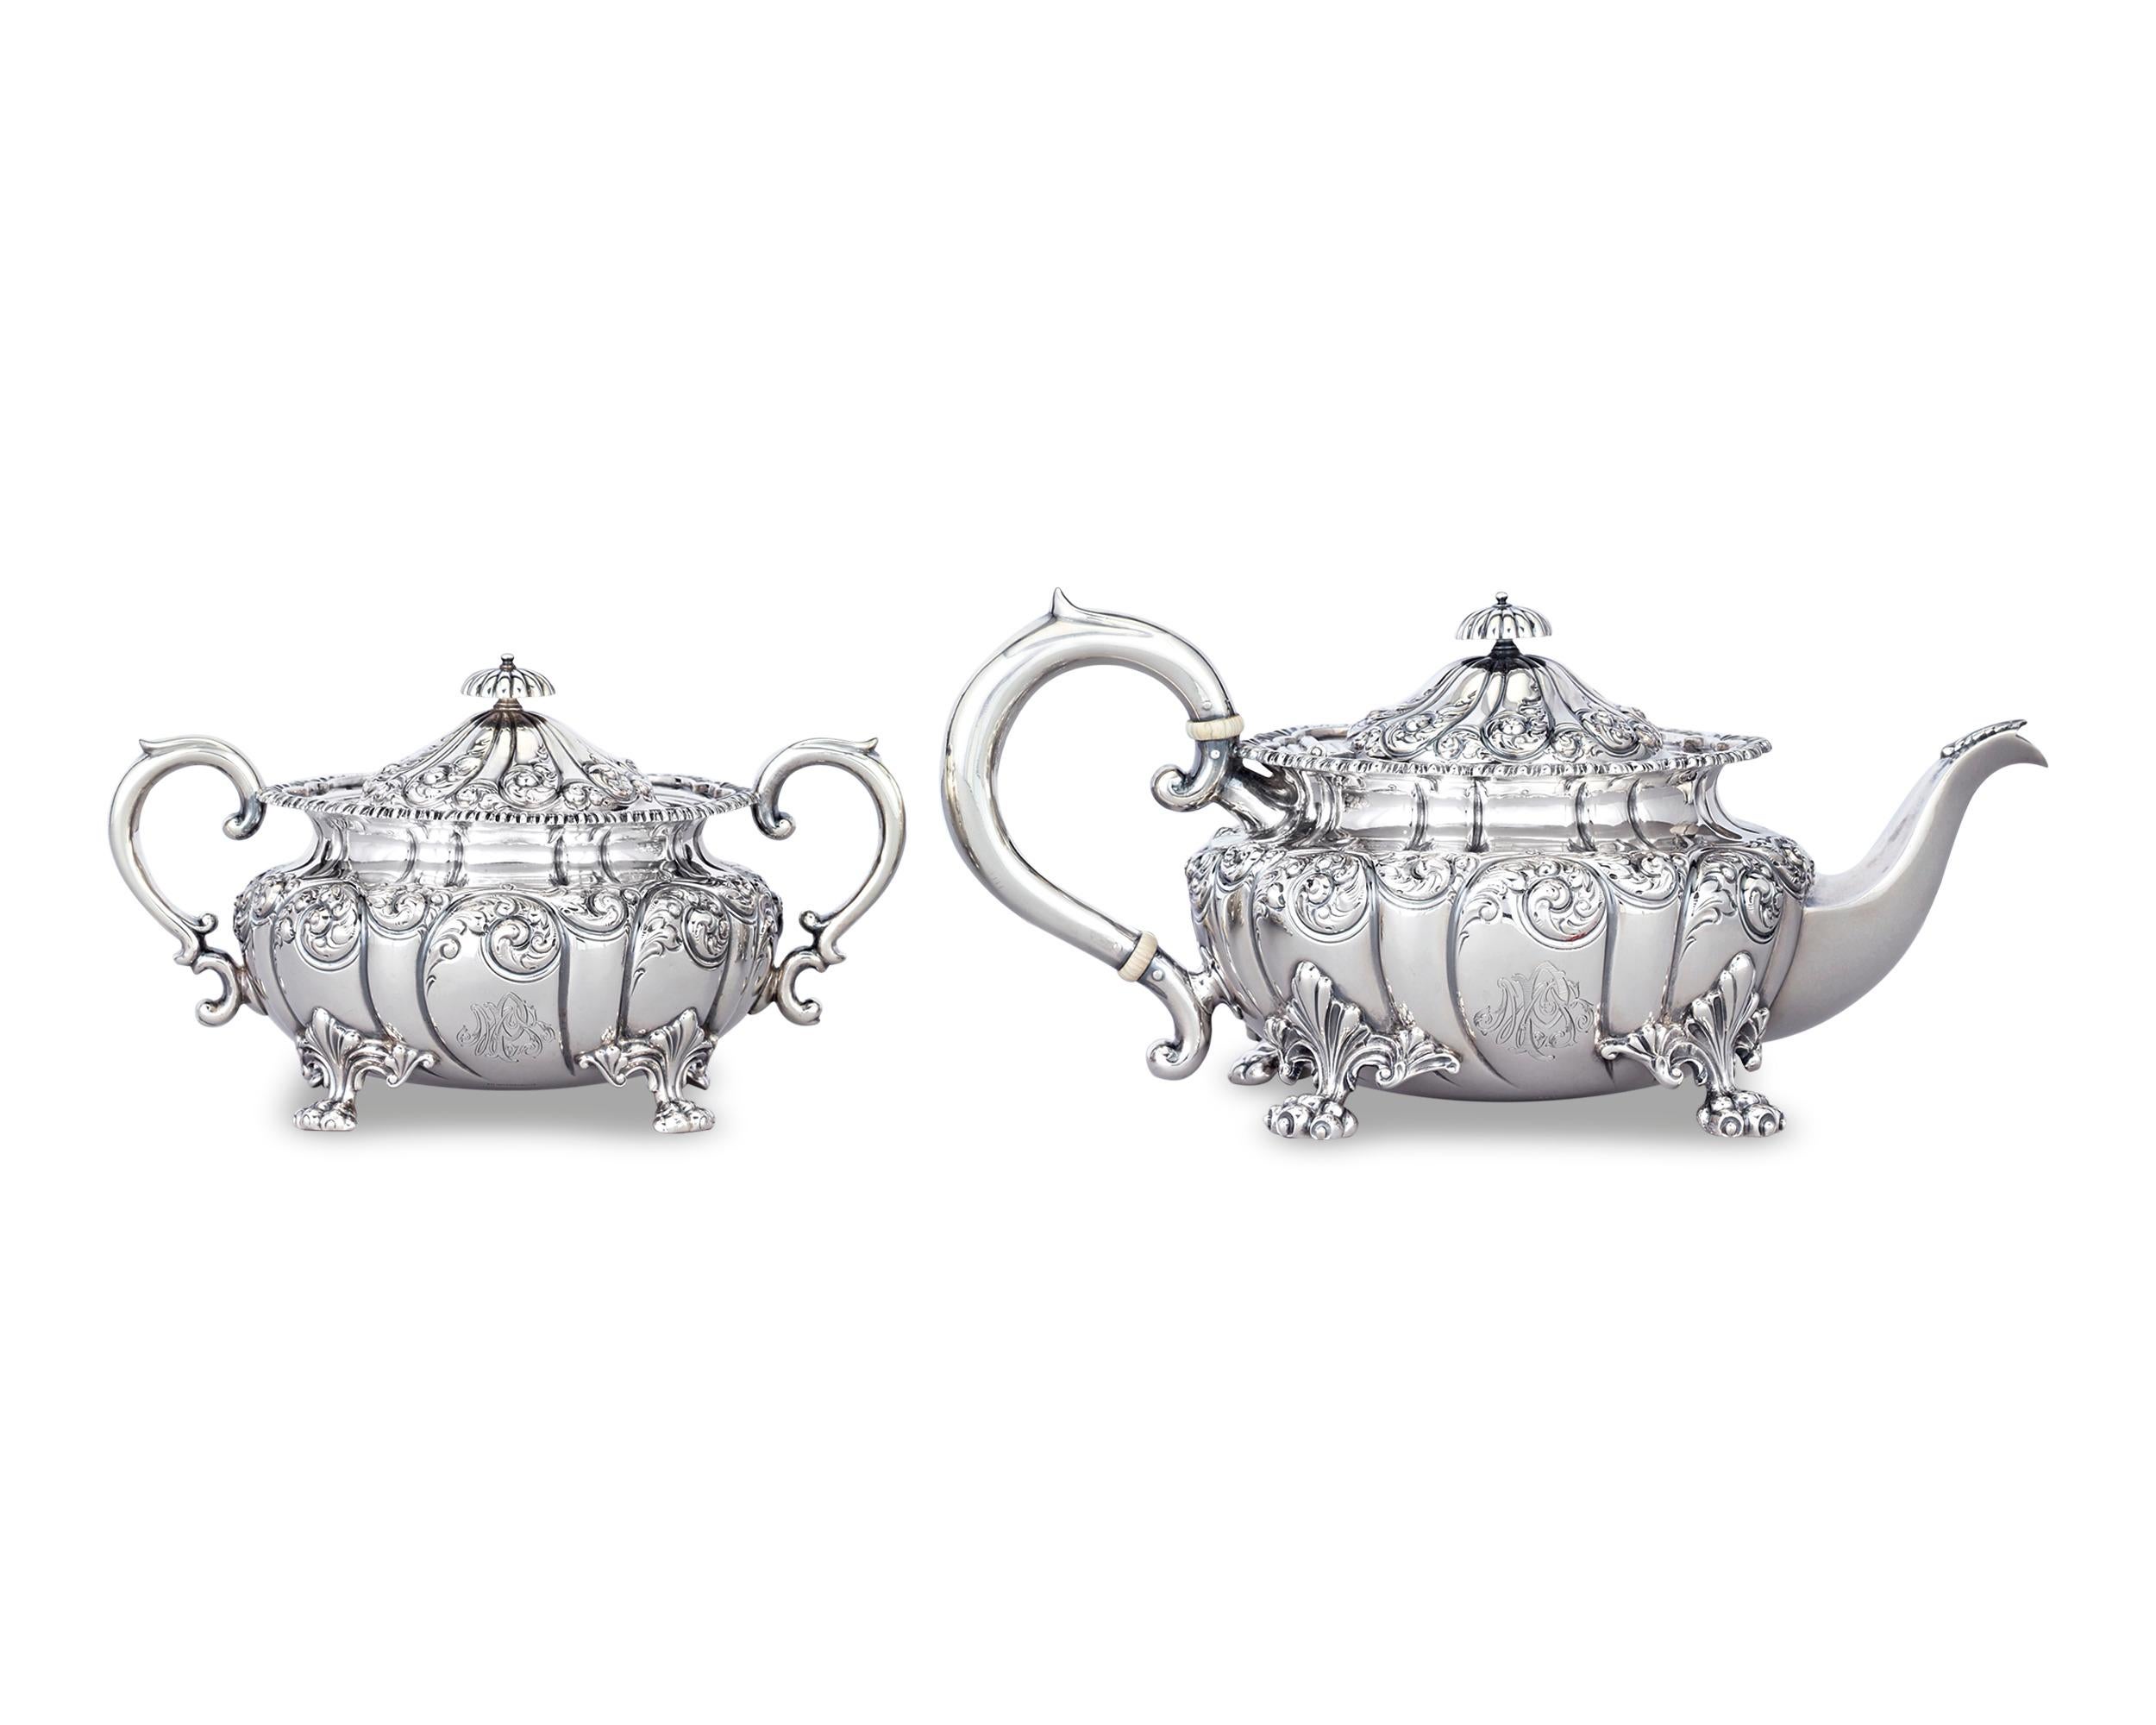 sterling silver tea and coffee service